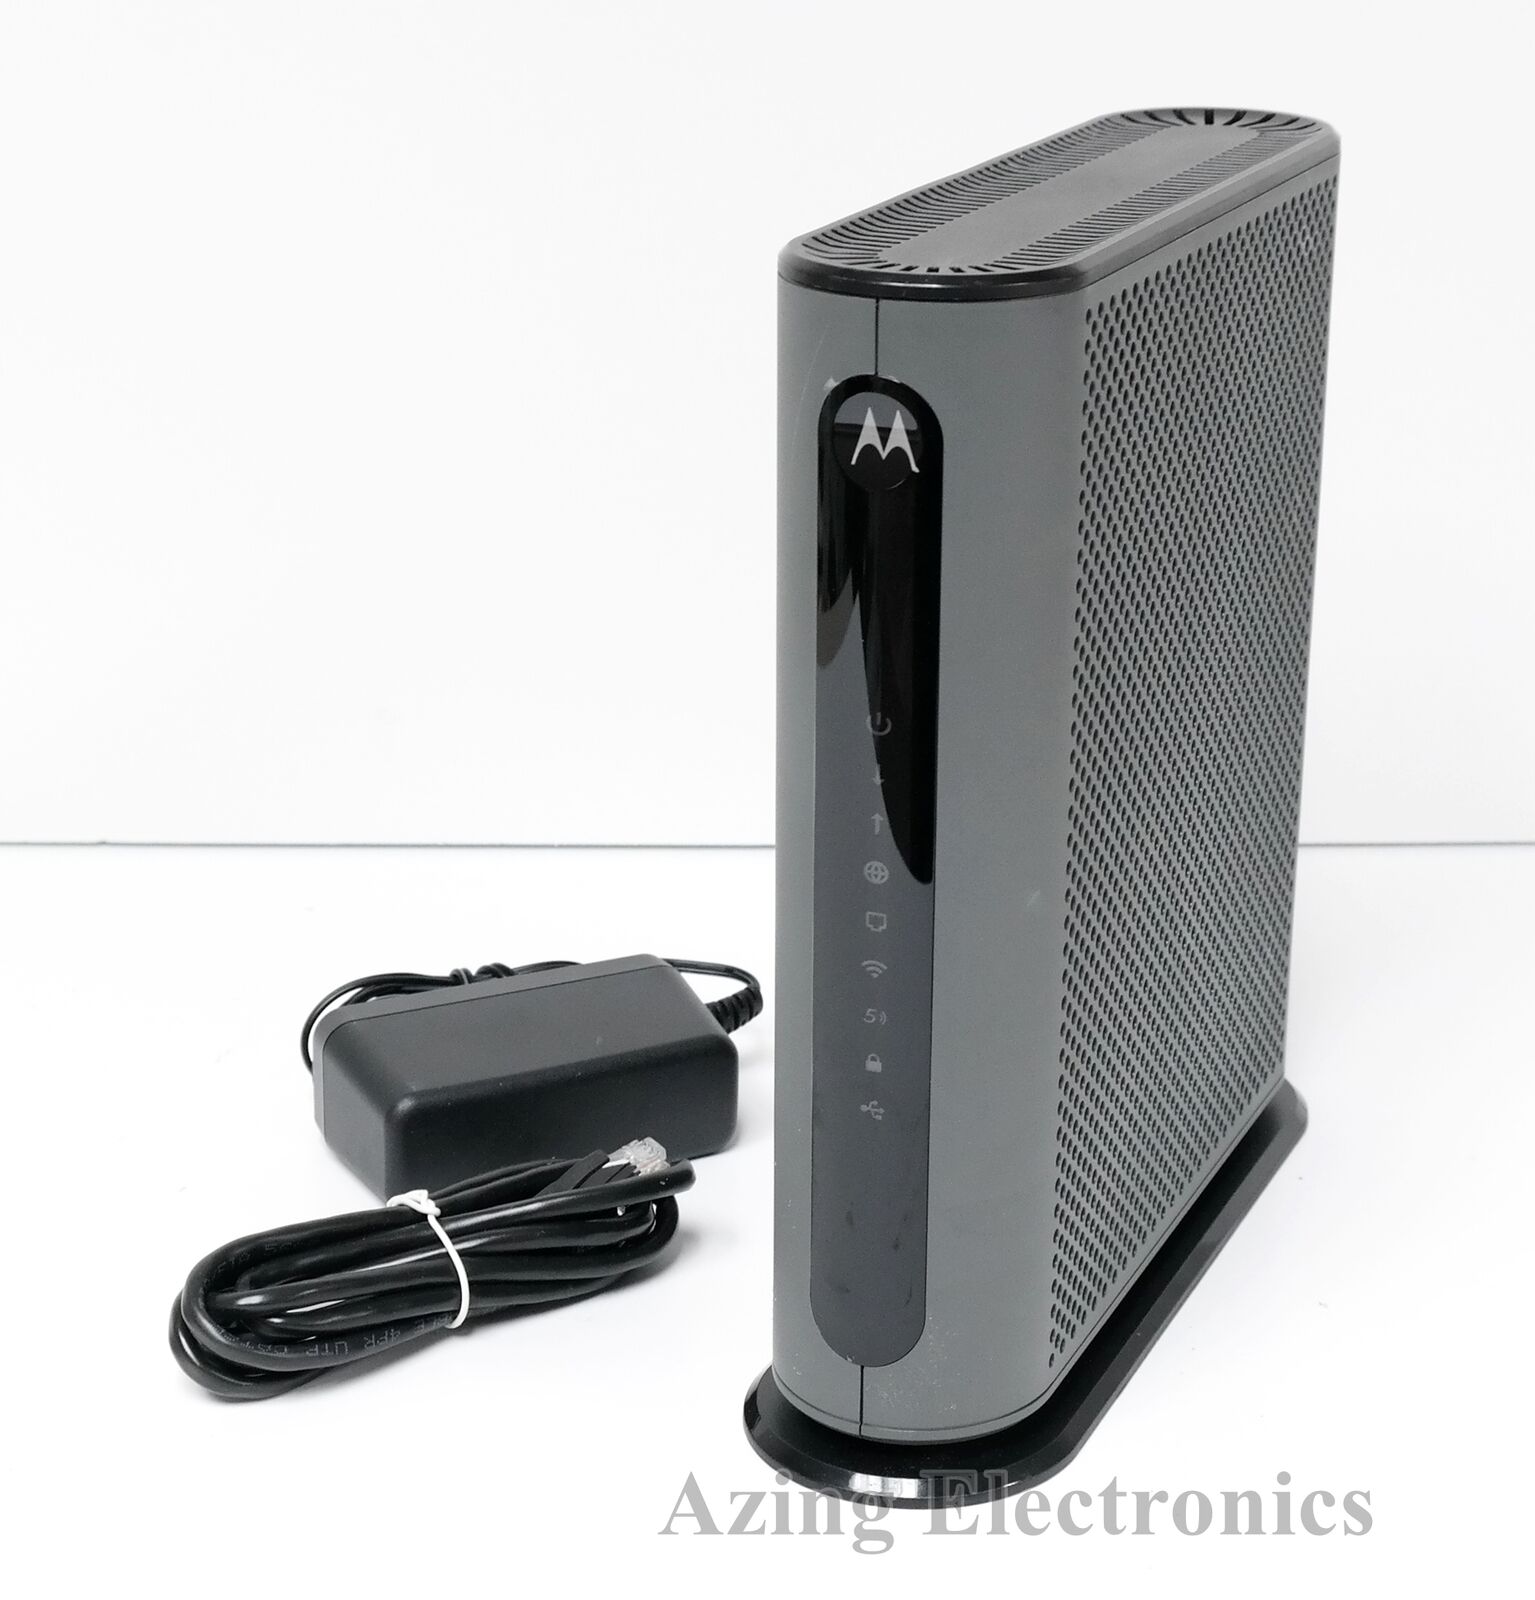 Motorola MG8702 AC3200 DOCSIS 3.1 Cable Modem Router ISSUE